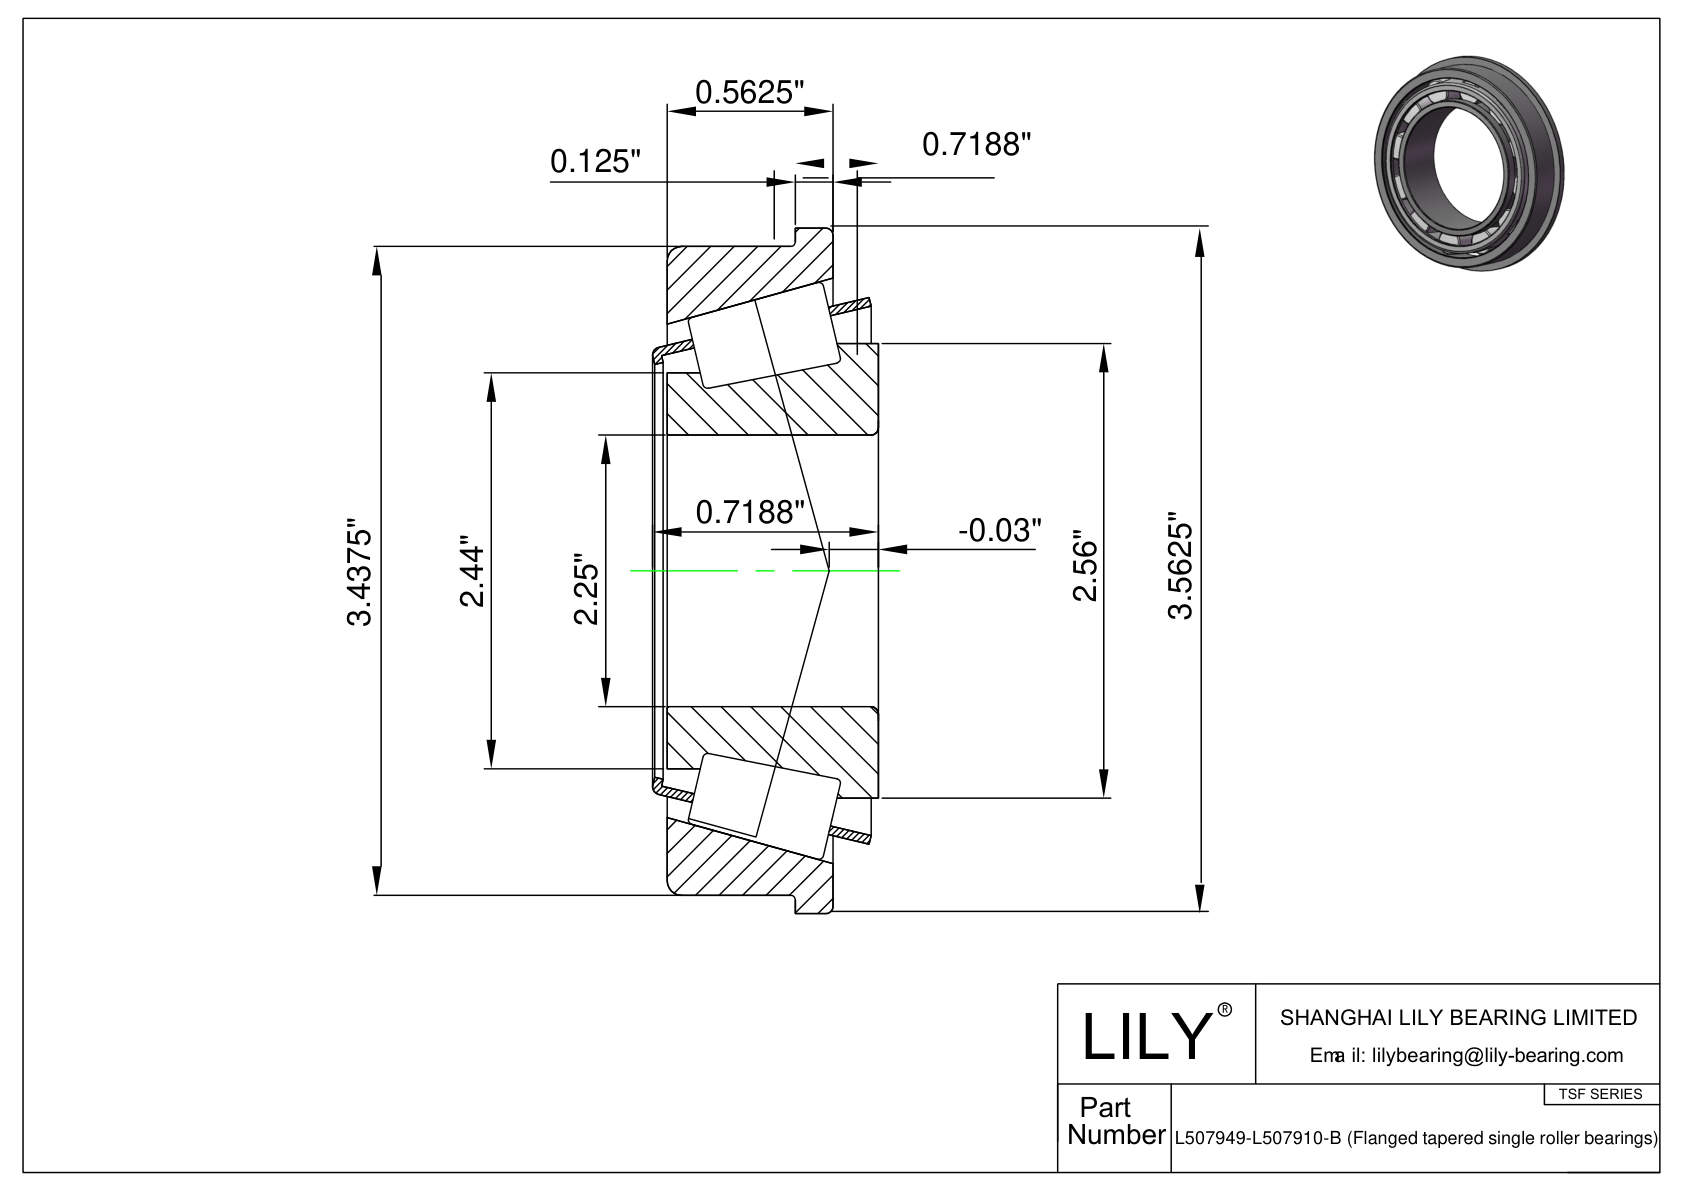 L507949-L507910-B TSF (Tapered Single Roller Bearings with Flange) (Imperial) cad drawing